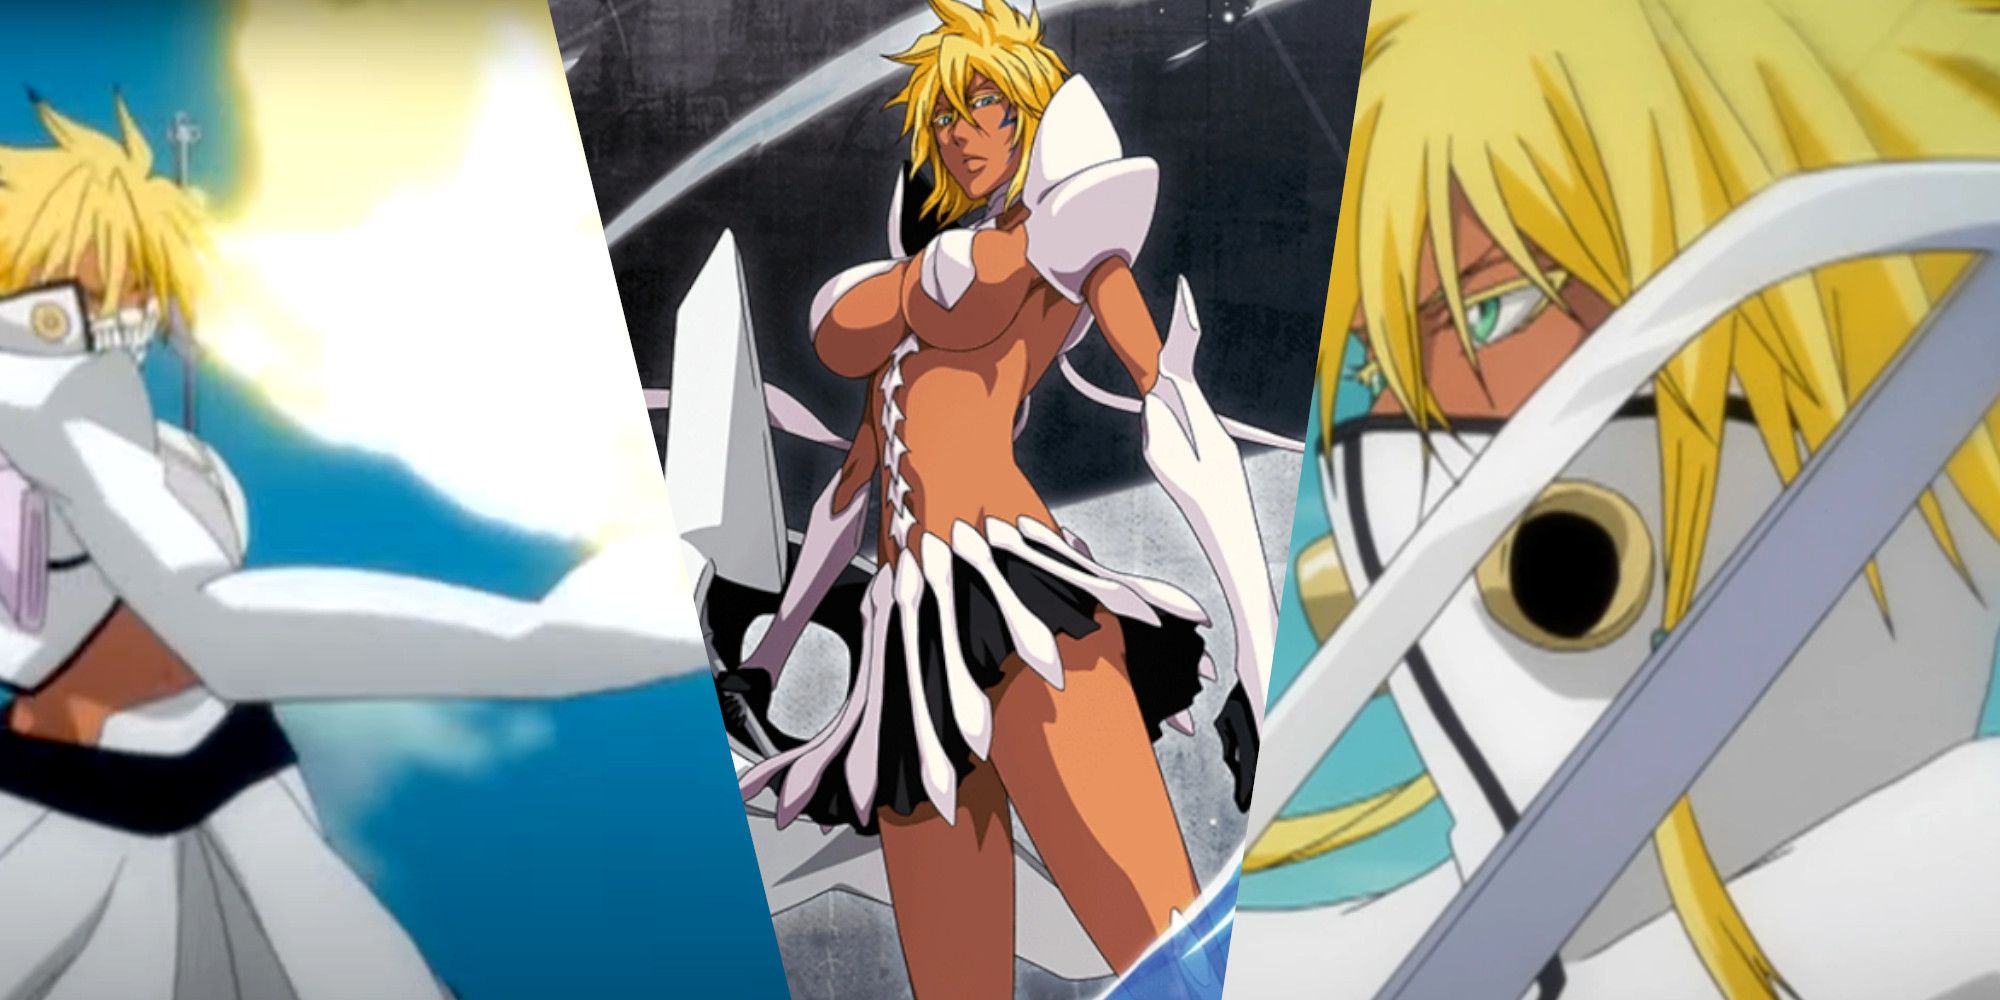 Bleach: Lady Halibel's Most Powerful Attacks & Abilities, Ranked